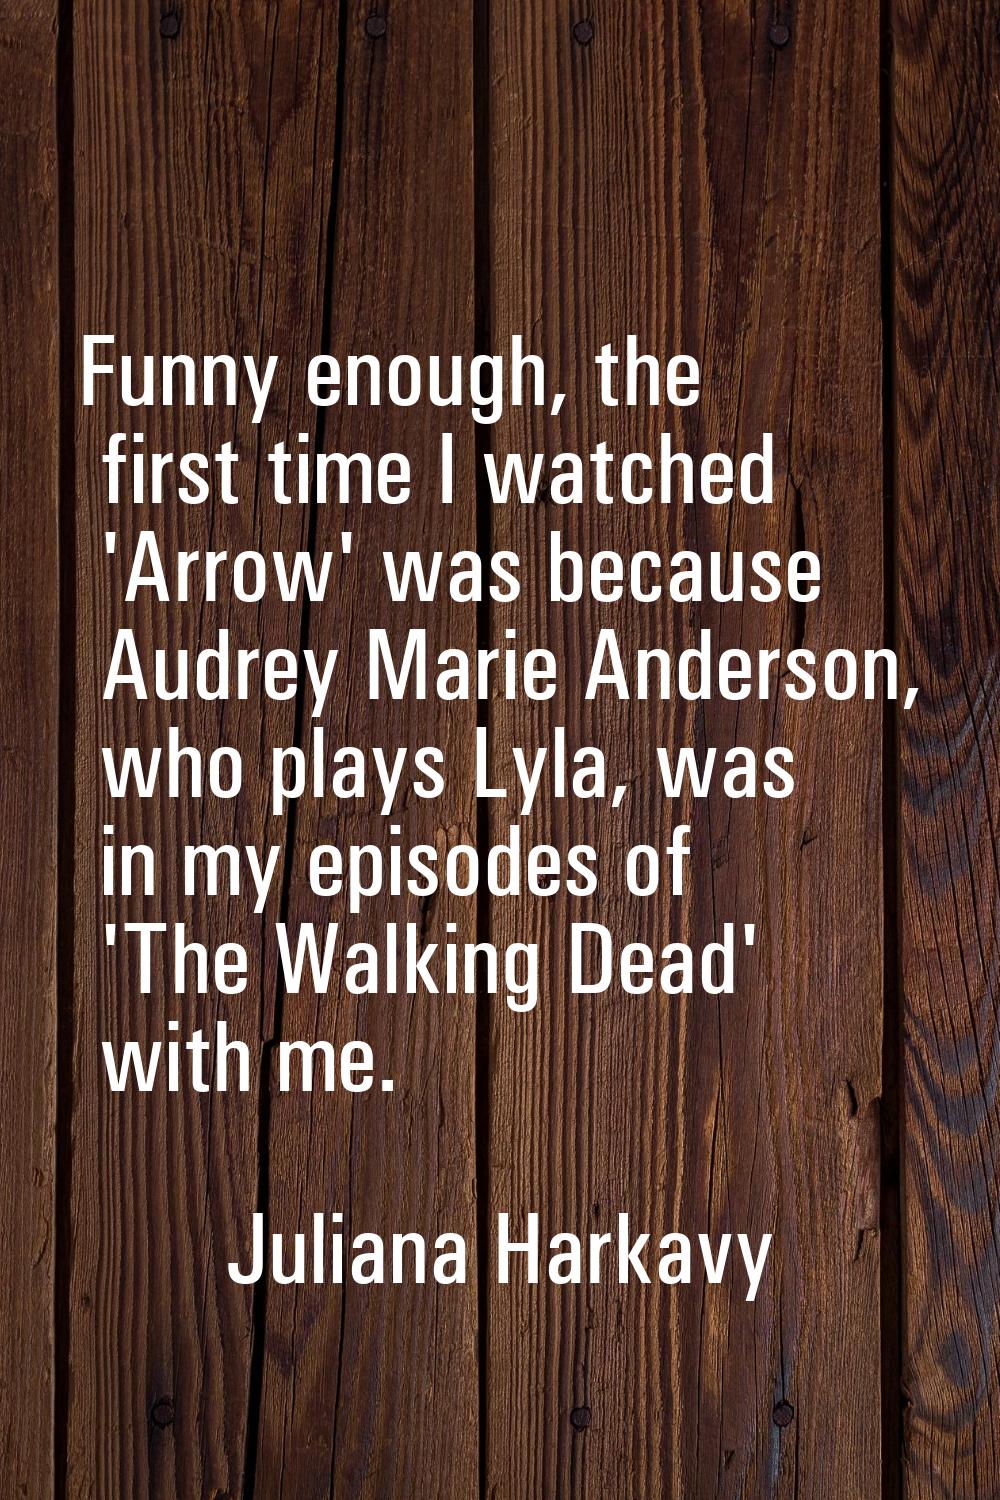 Funny enough, the first time I watched 'Arrow' was because Audrey Marie Anderson, who plays Lyla, w